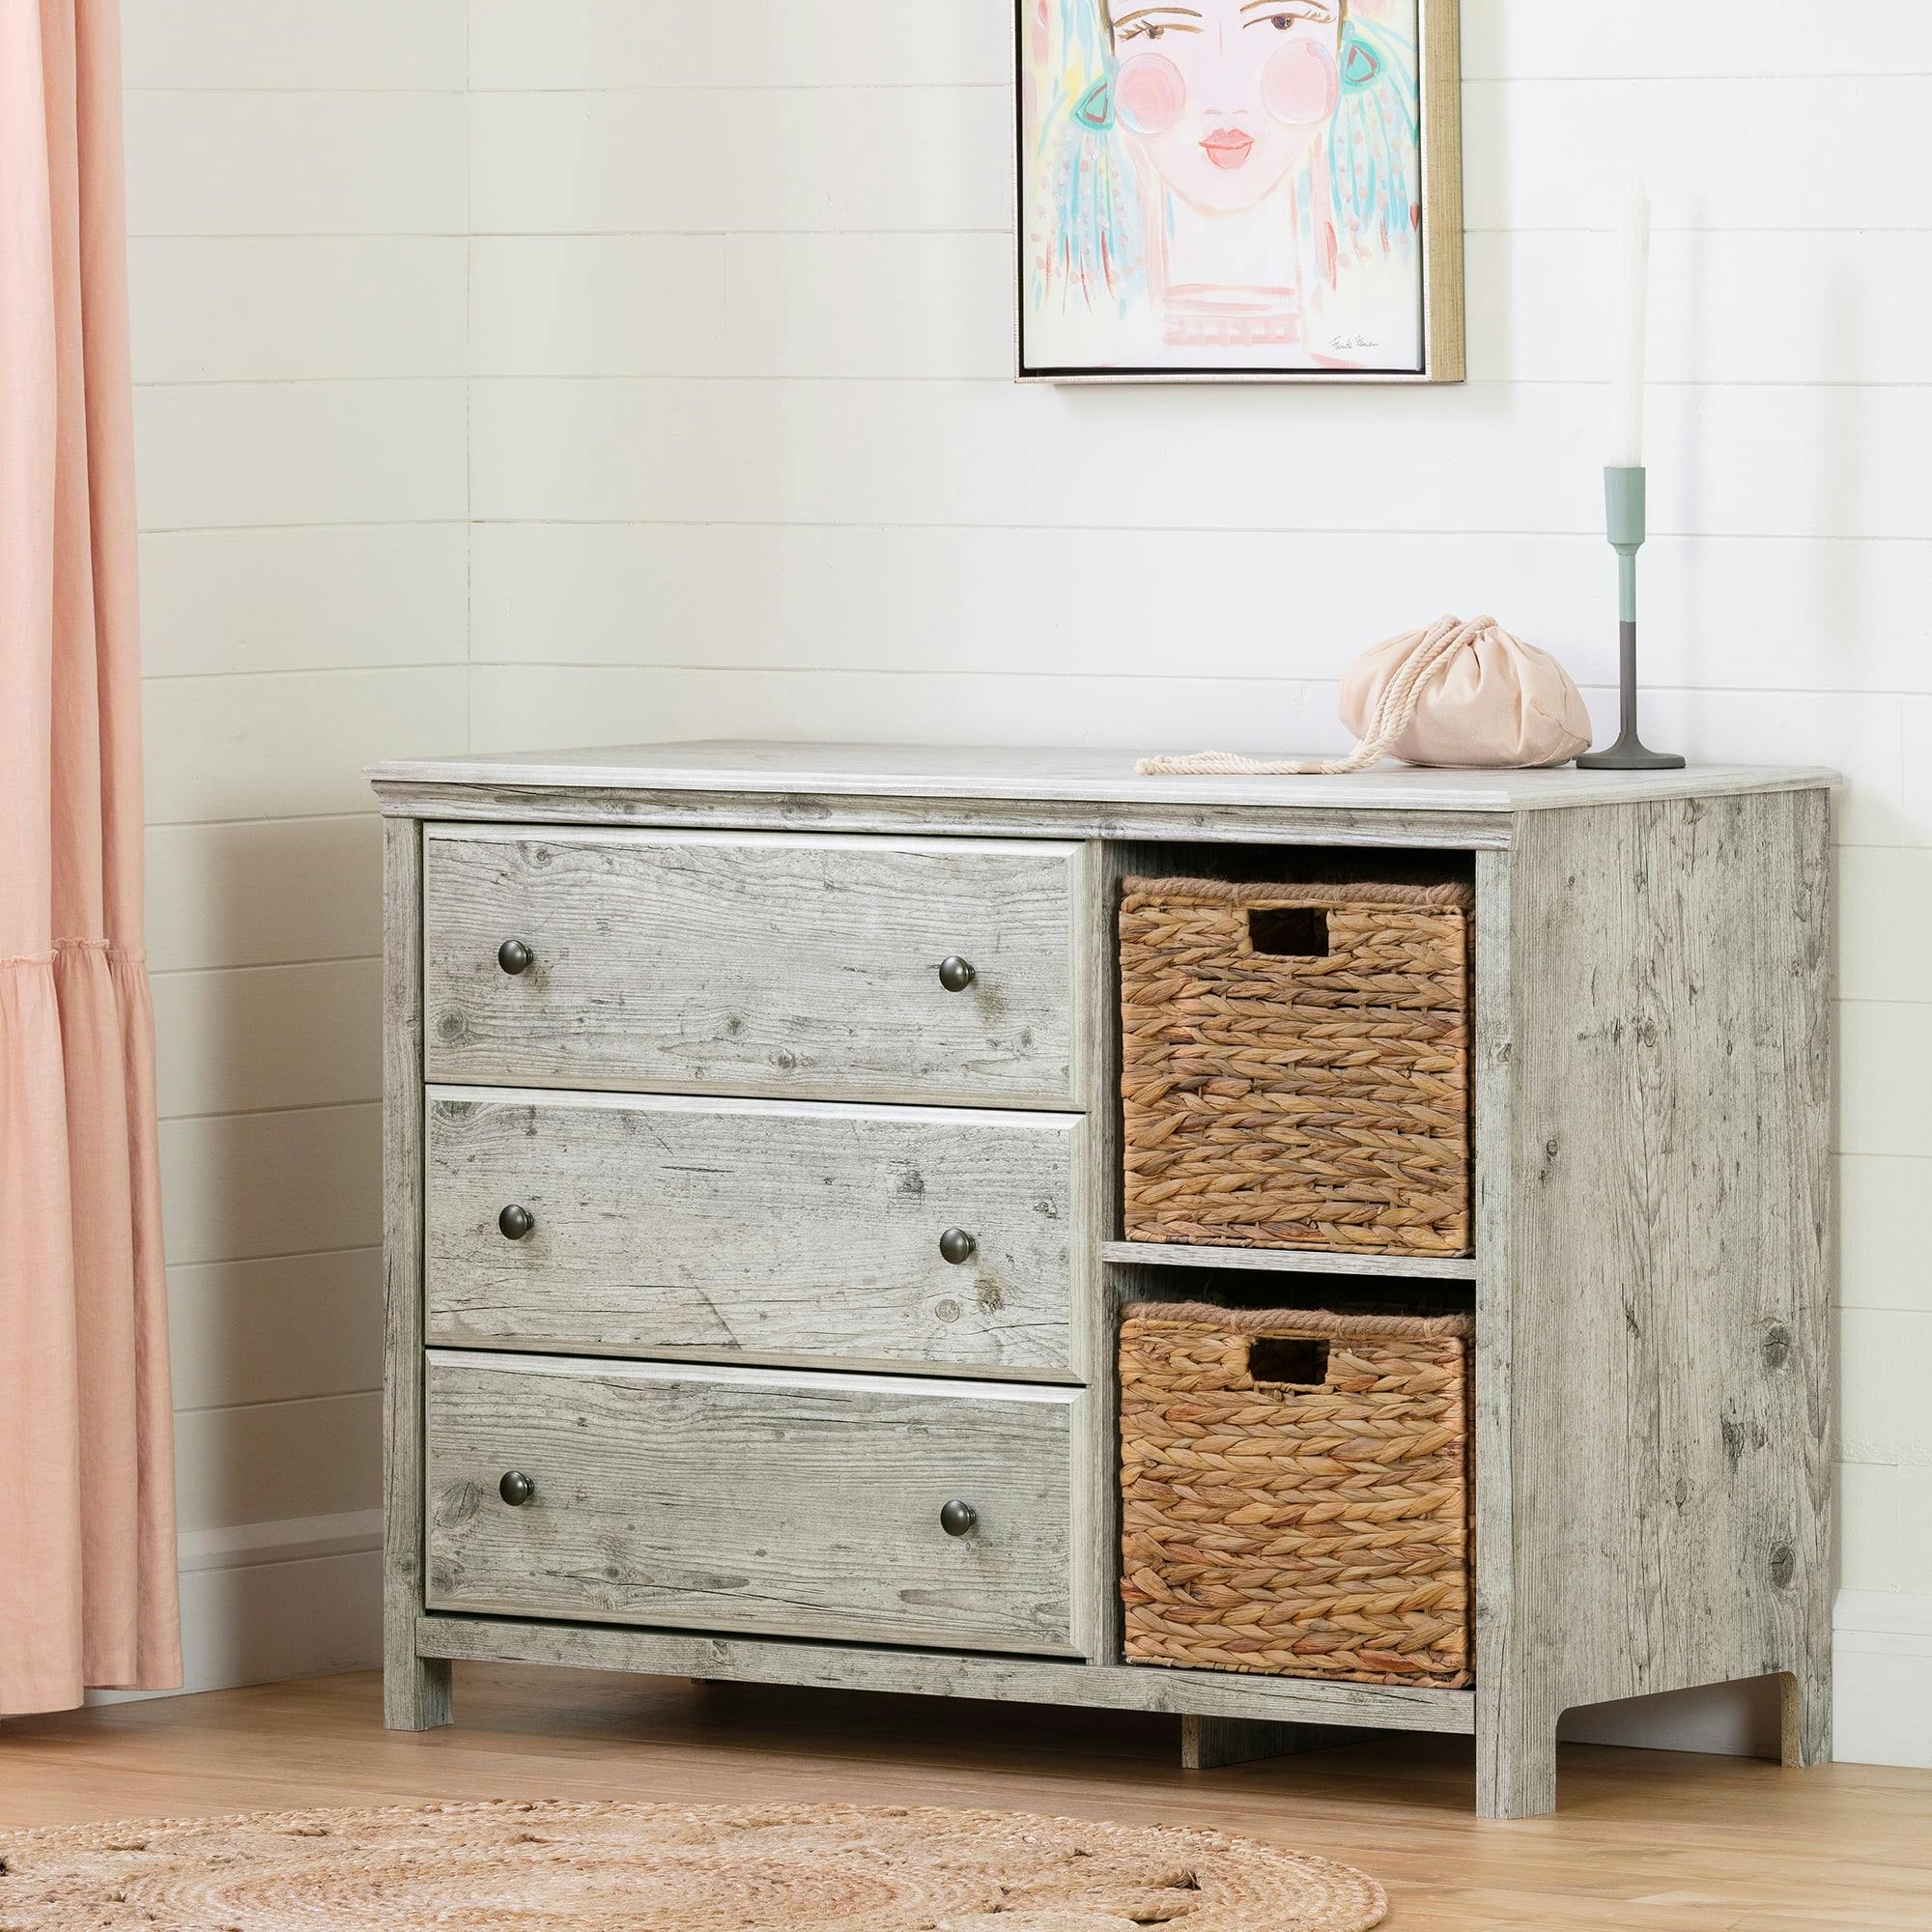 Seaside Pine Cottage-Style 3-Drawer Dresser with Baskets